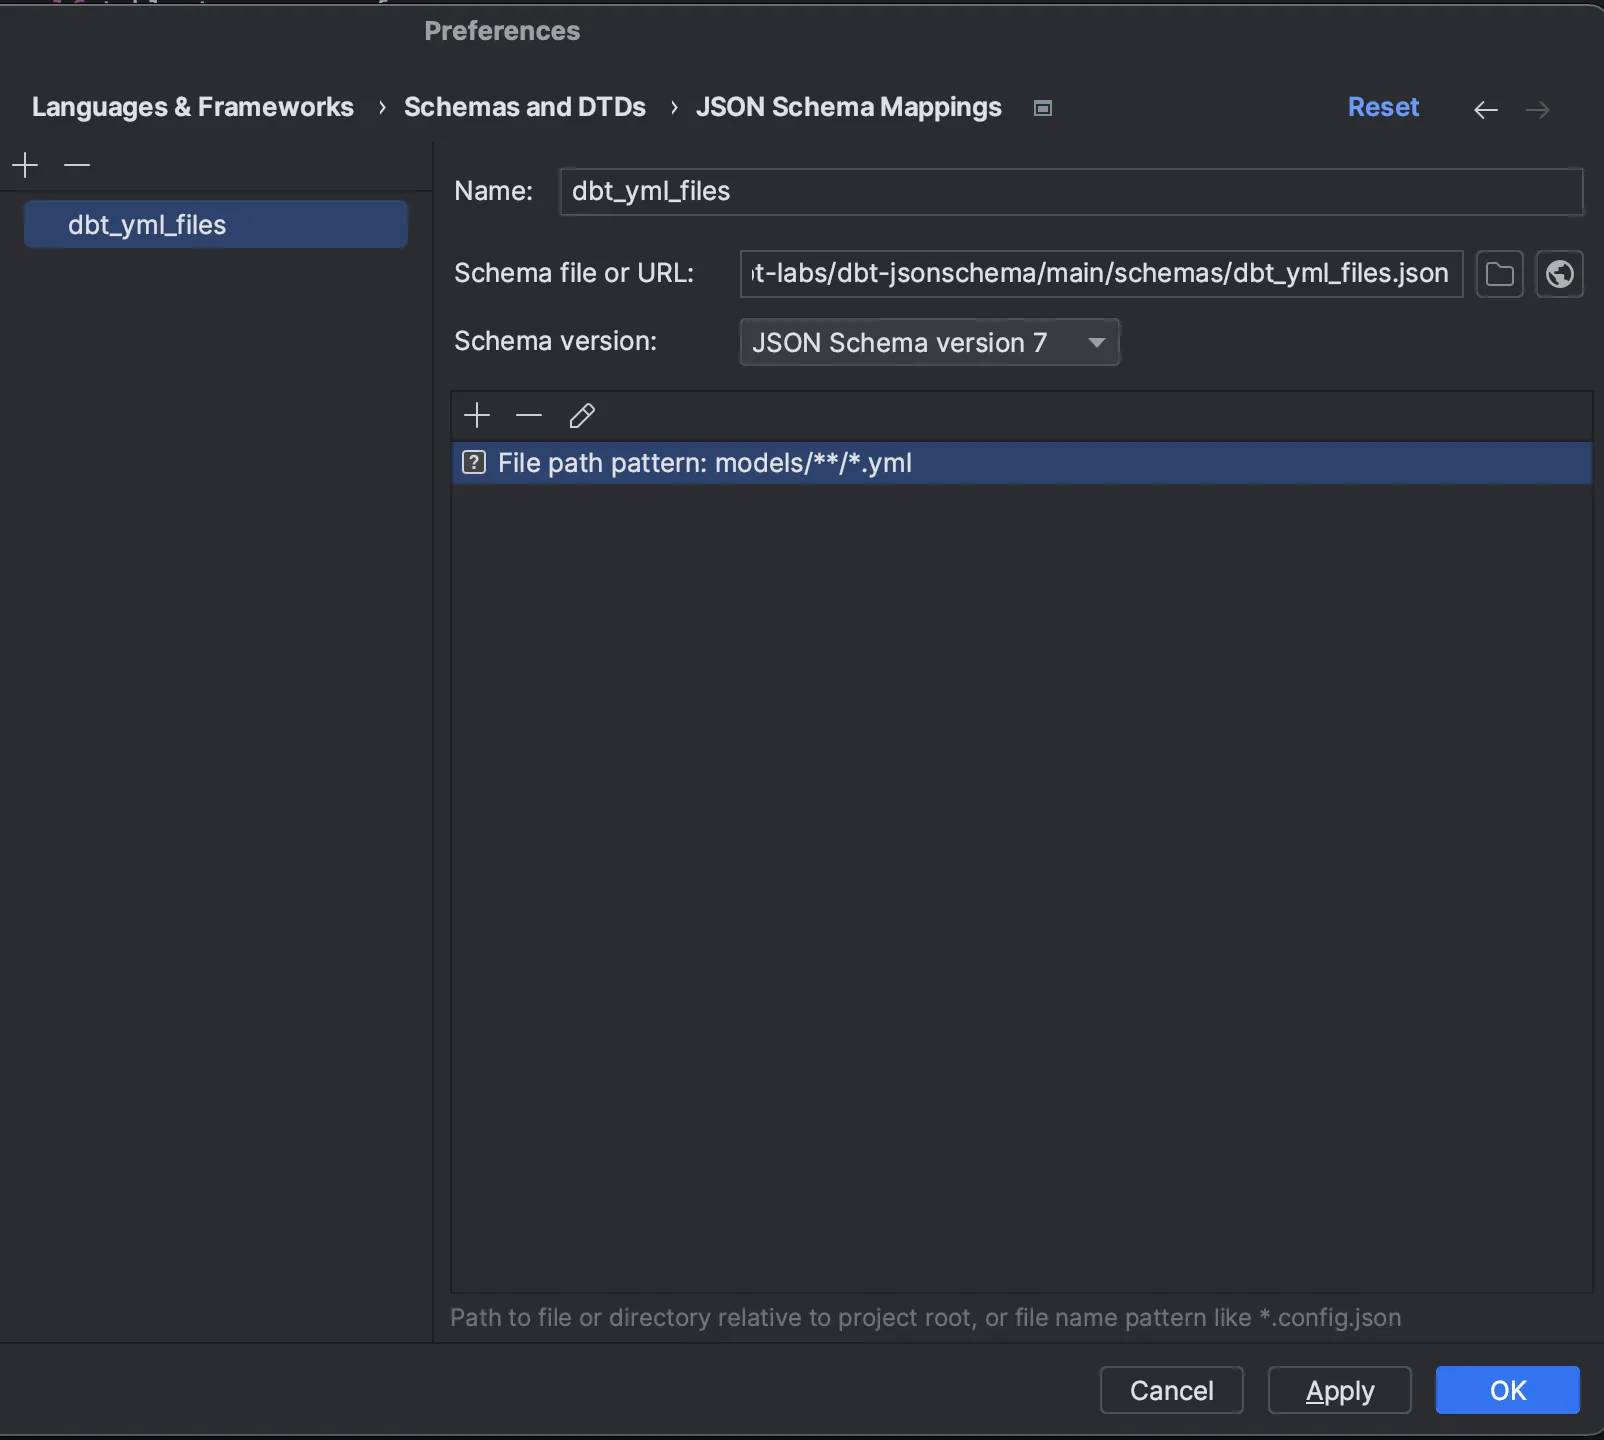 A screenshot of a JetBrains Preferences panel showing the correct mapping of the dbt_yml_files JSON Schema